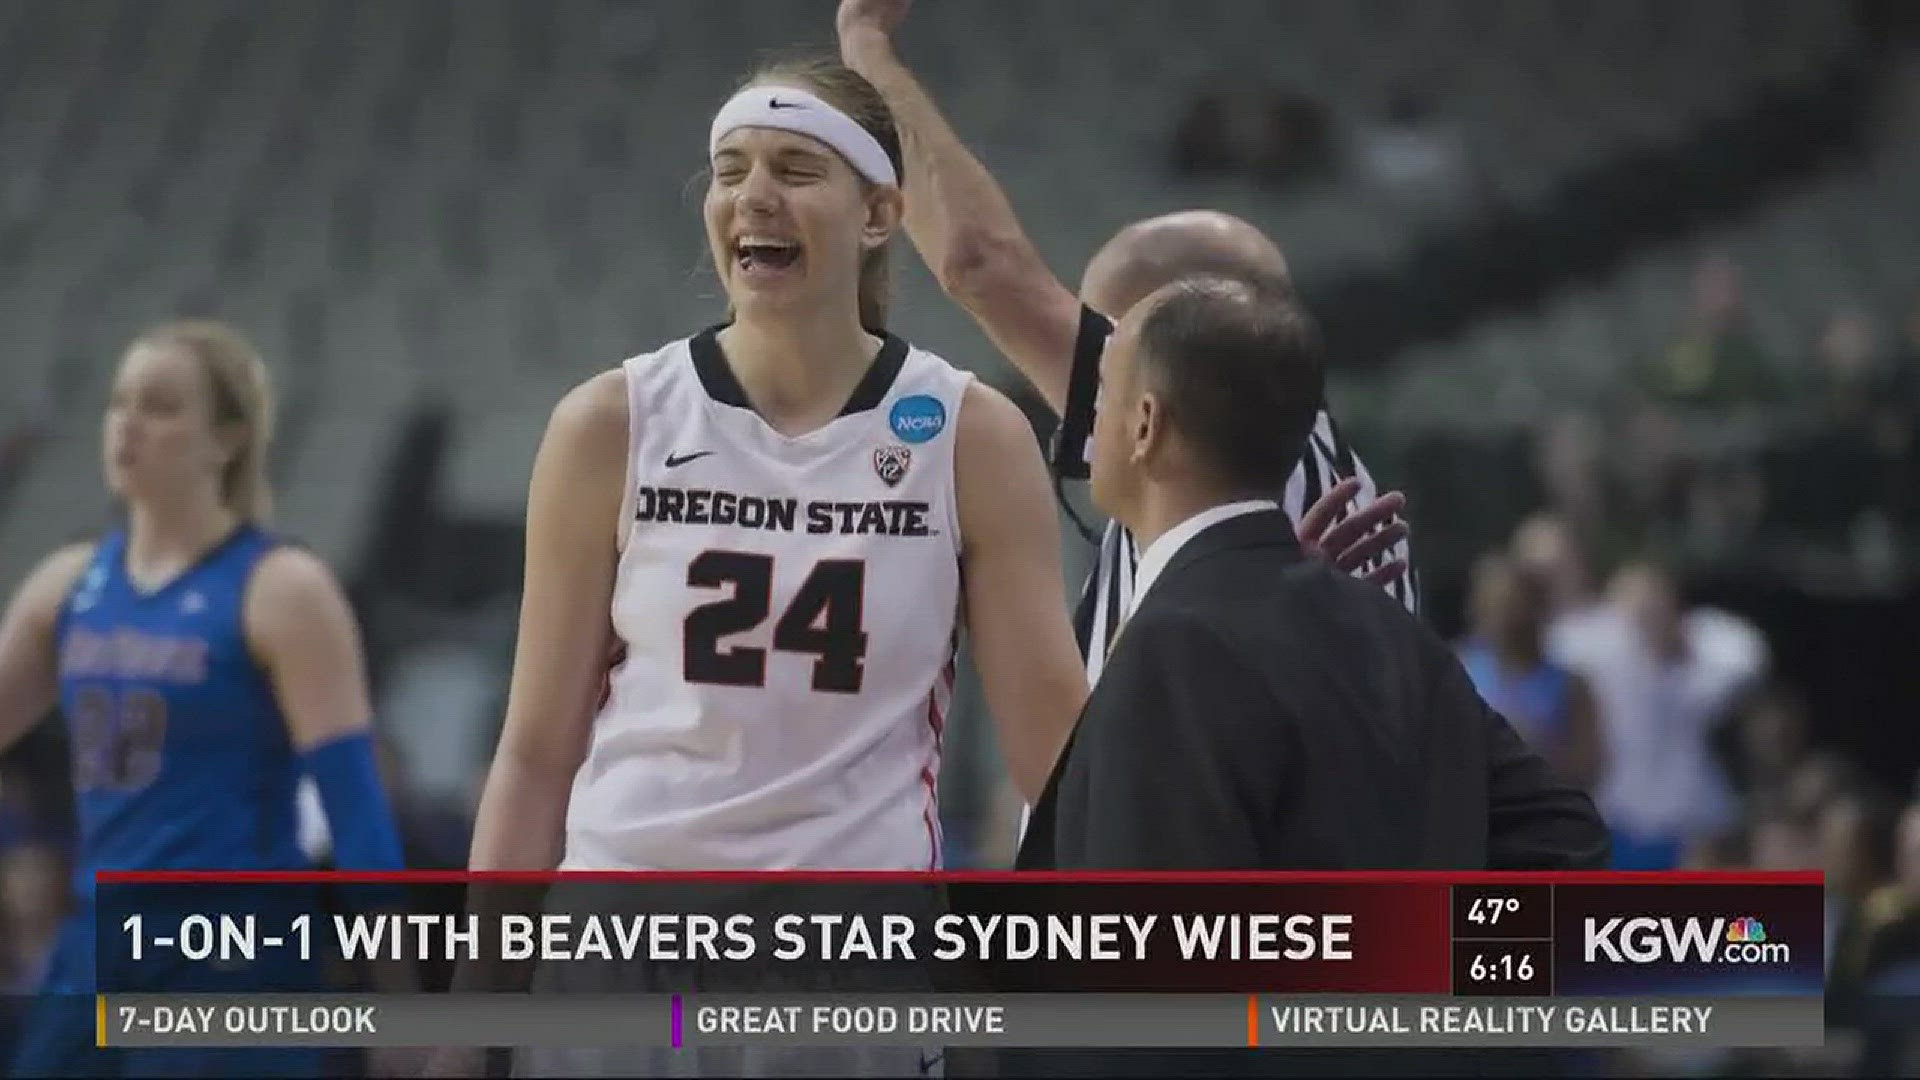 One-on-one with Beavers star Sydney Wiese